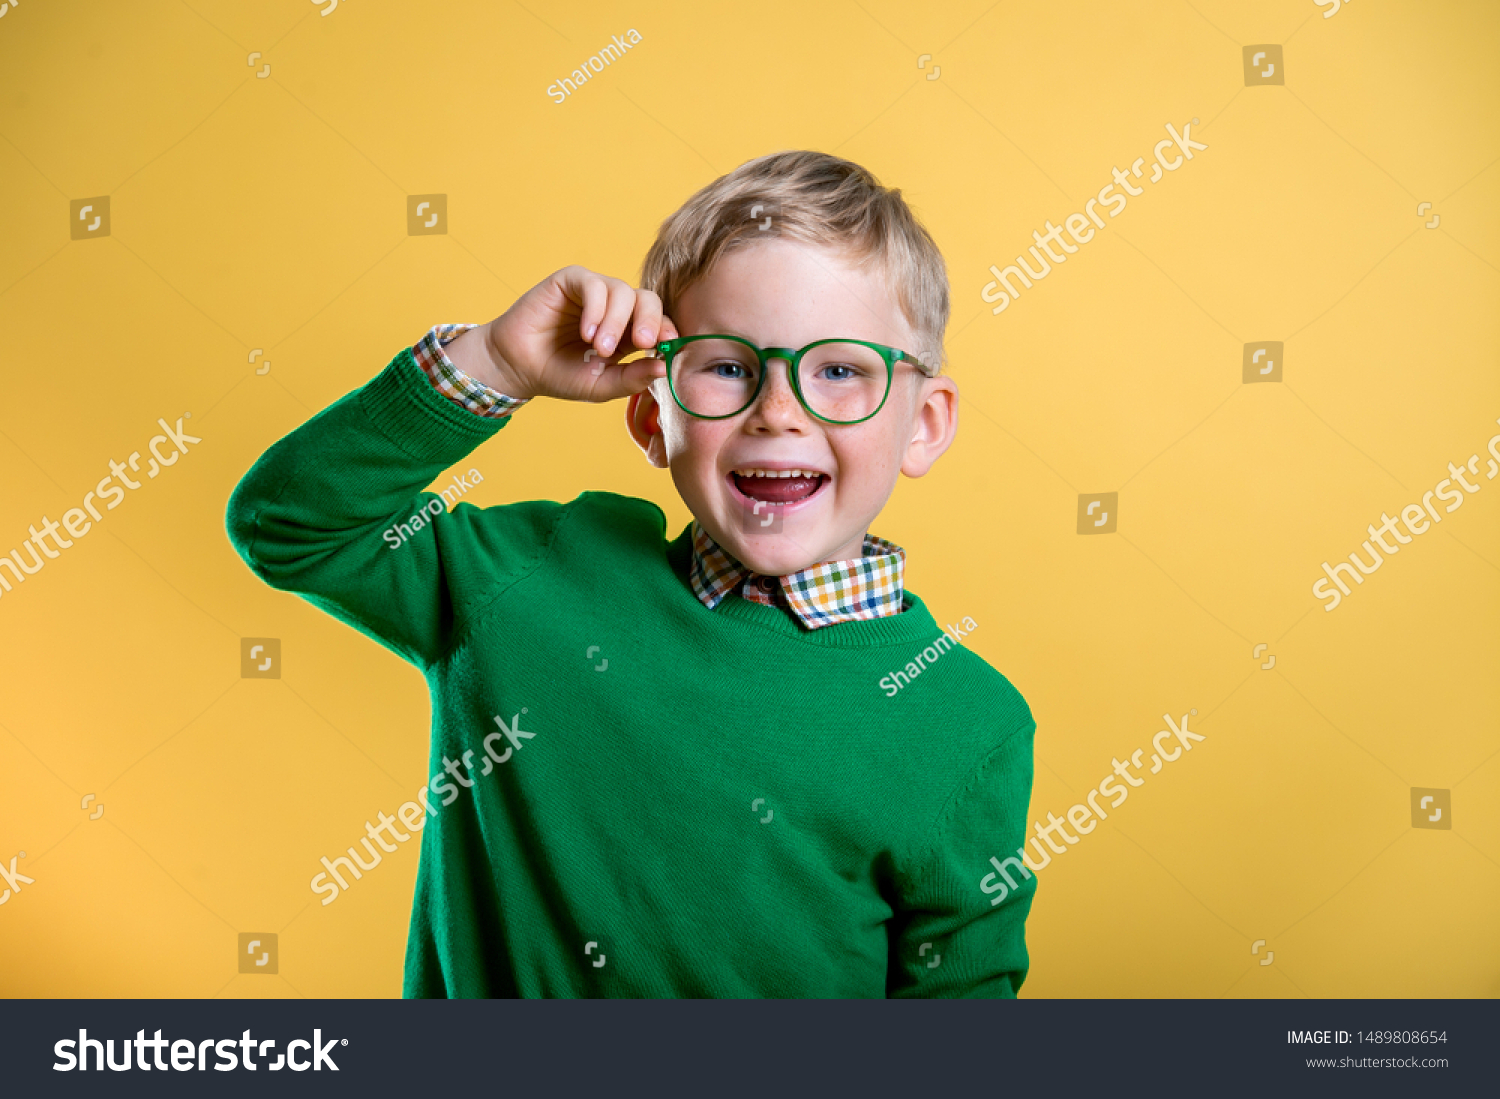 Portrait of blond little boy in green sweater and glasses. Kid at eye sight test. Stylish child holding glasses and looking at camera. Vision, eyesight measurement for school children. Back to school. #1489808654